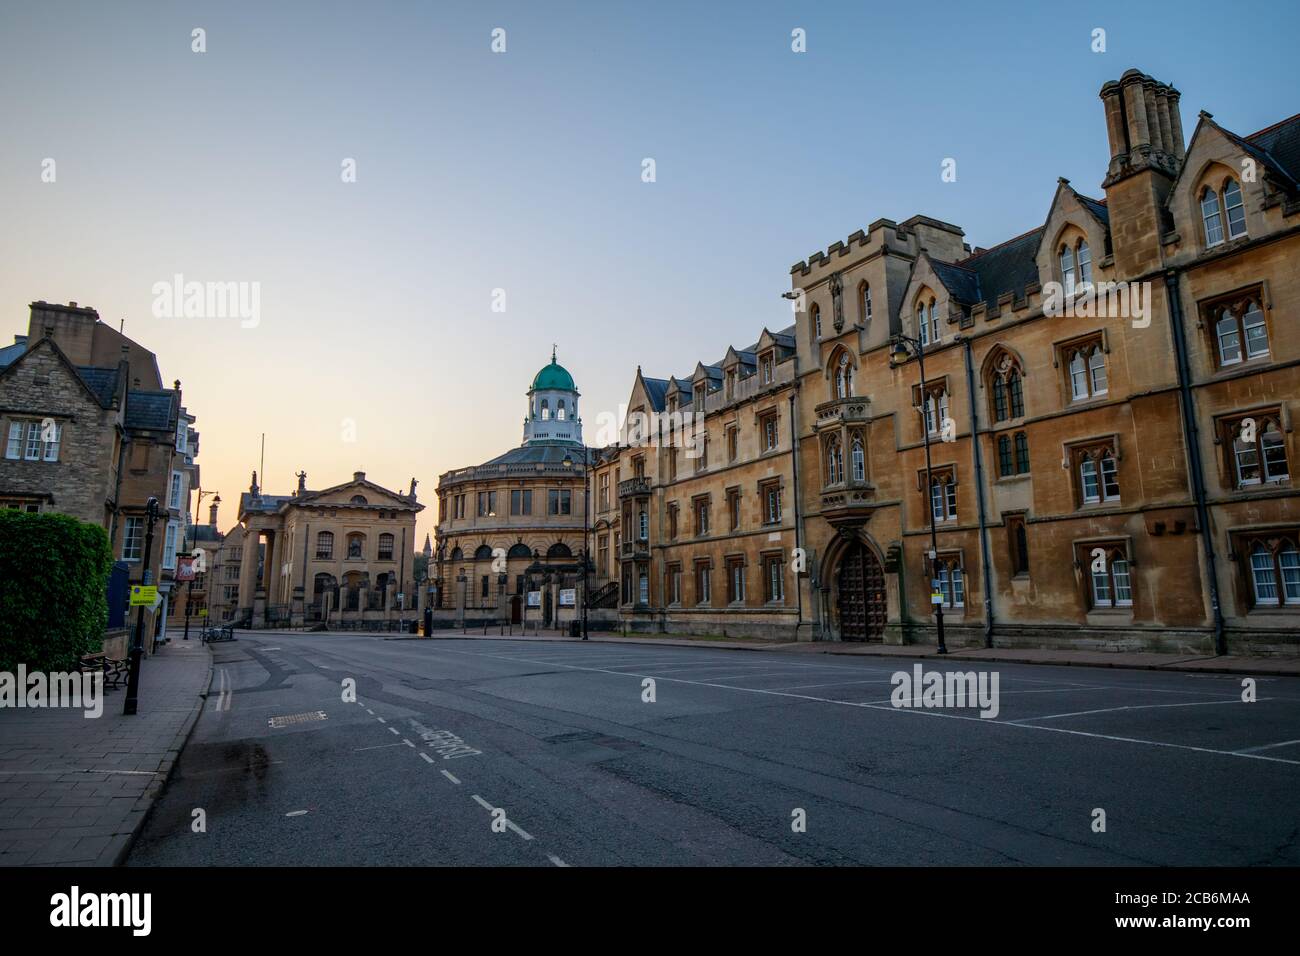 The Clarendon Building, The Sheldonian Theatre and Exeter College lining Broad Street in Oxford with no people or vehicles. Early in the morning. Stock Photo